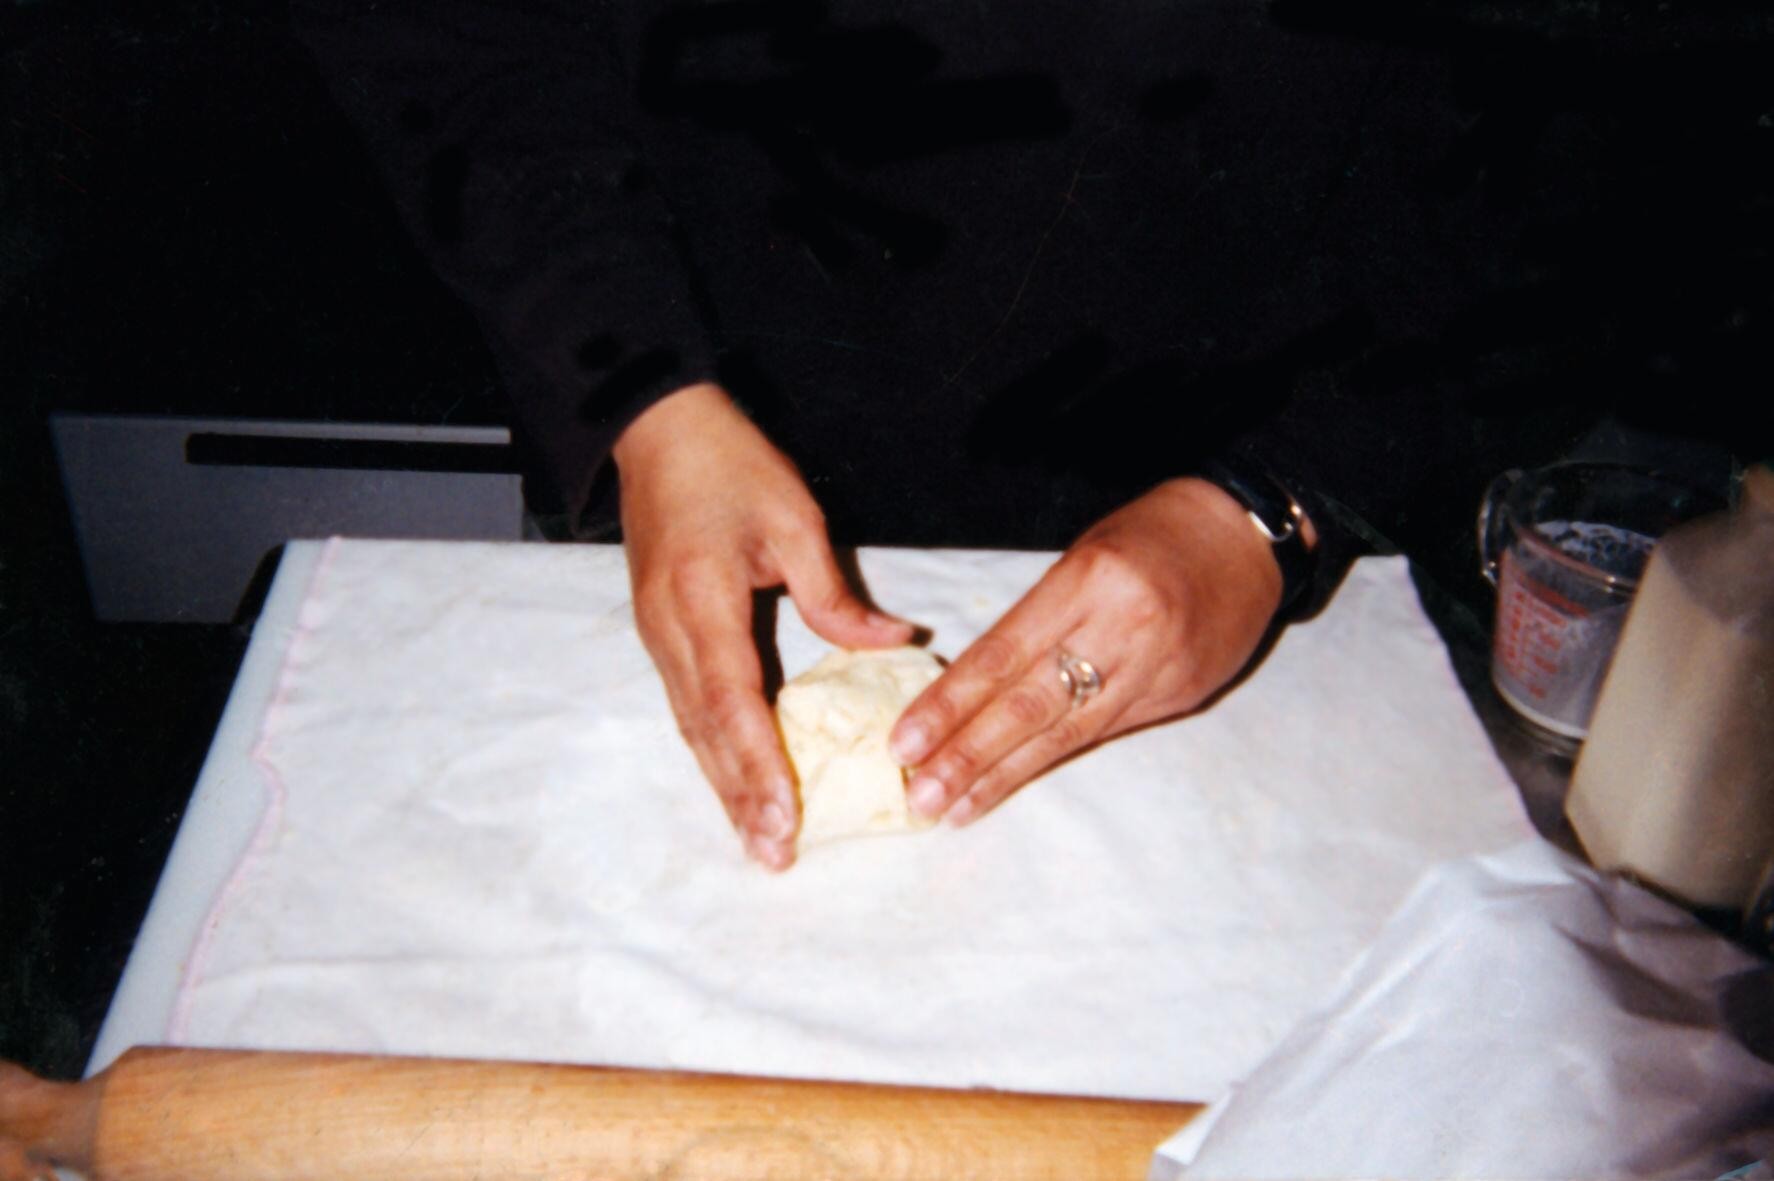 A photograph of hands kneading a small ball of dough on a cloth with a rolling pin in front